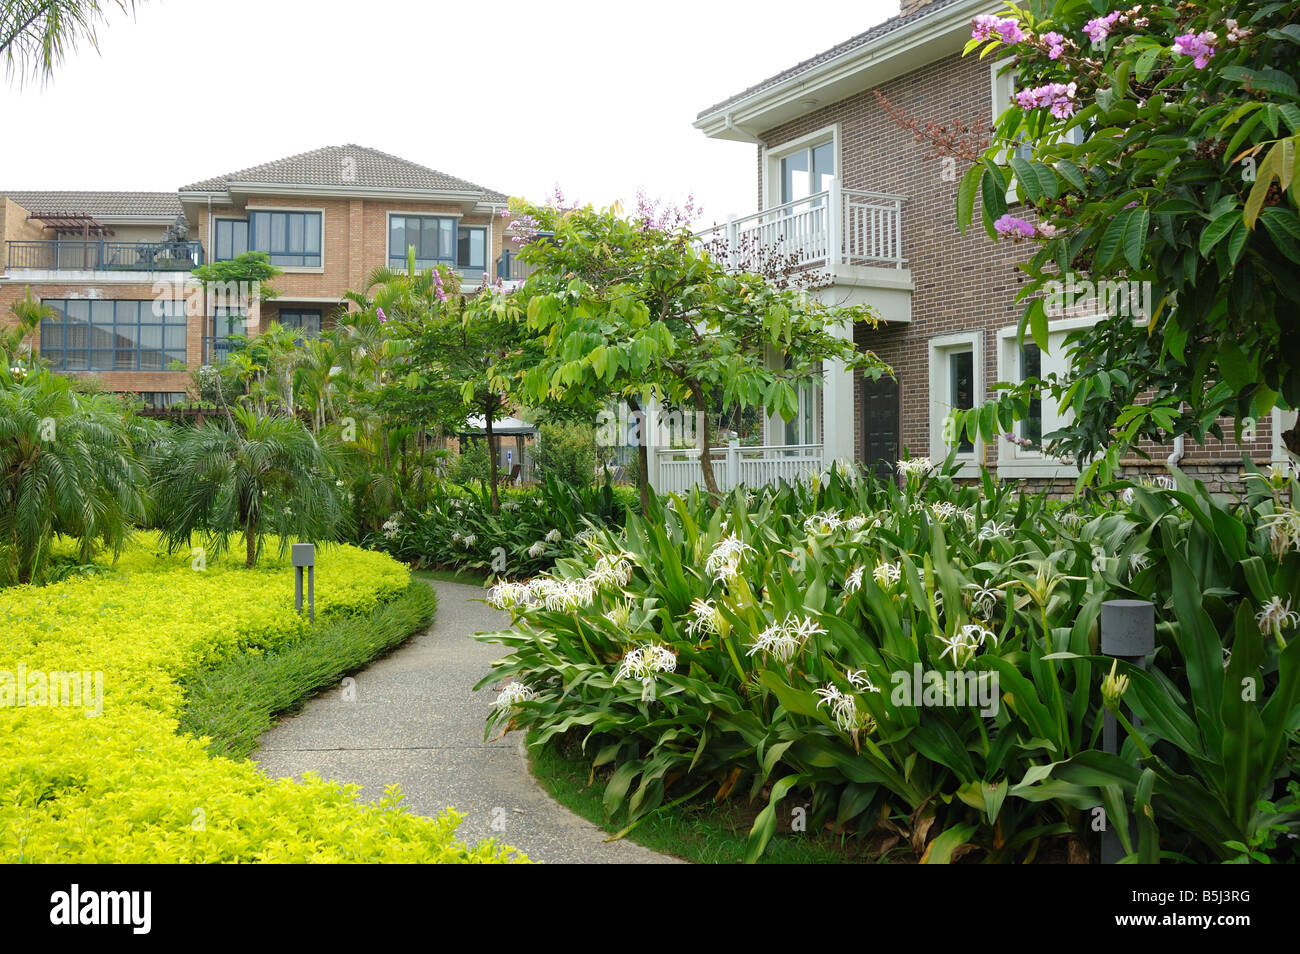 Garden for a new villa residential district in China Stock Photo